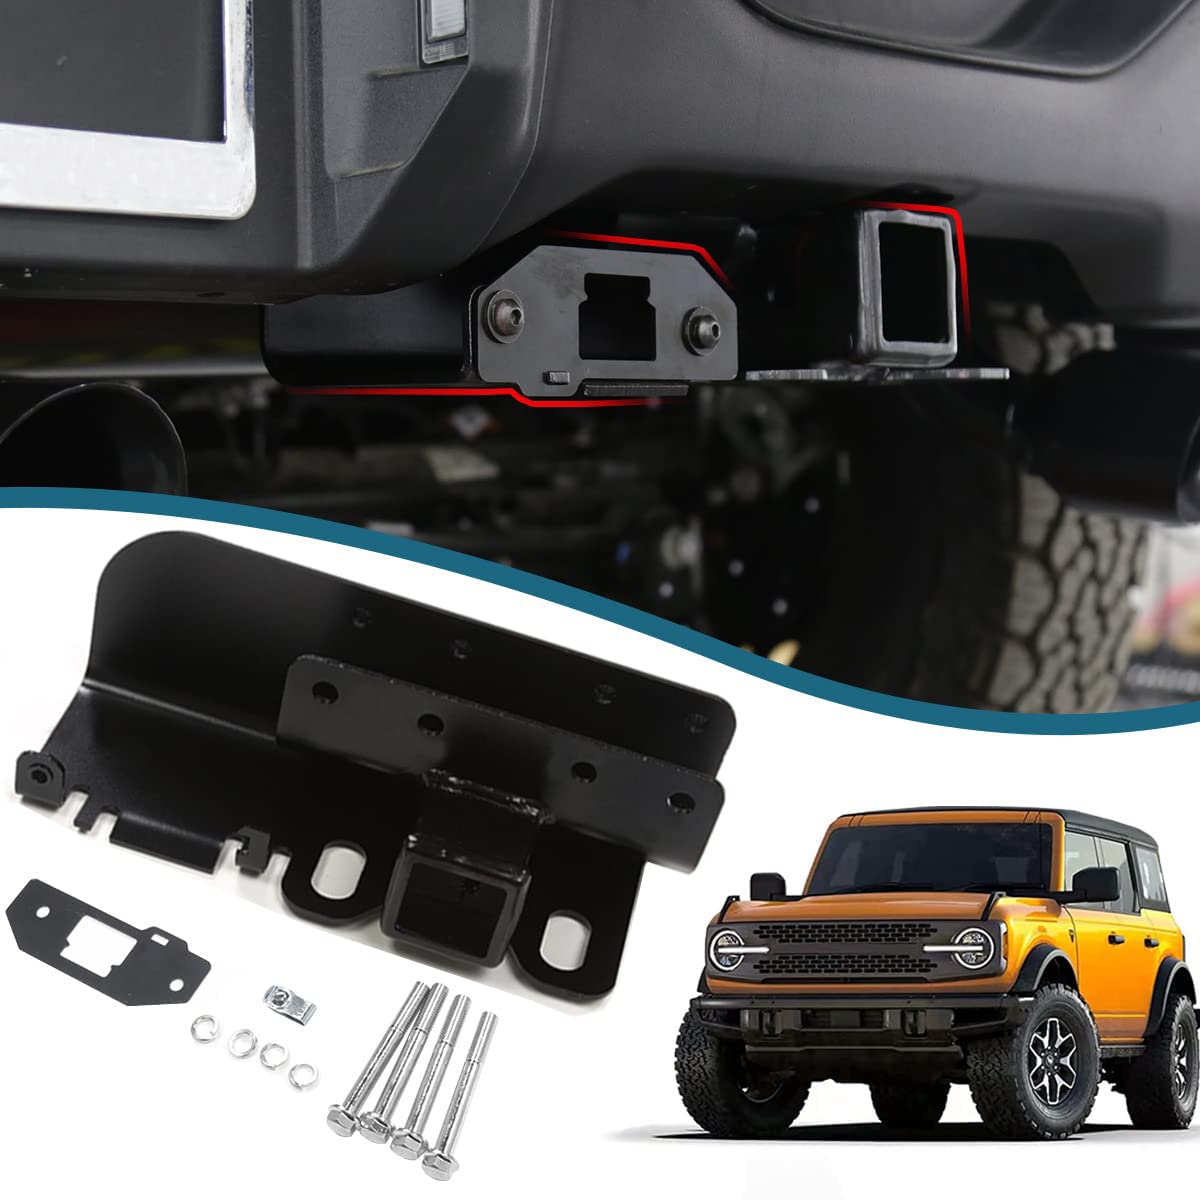 Ford Bronco Tectico Trailer Hitch -- a better deal than getting a hitch installed by the dealer! BroncoTrailerHitchhook